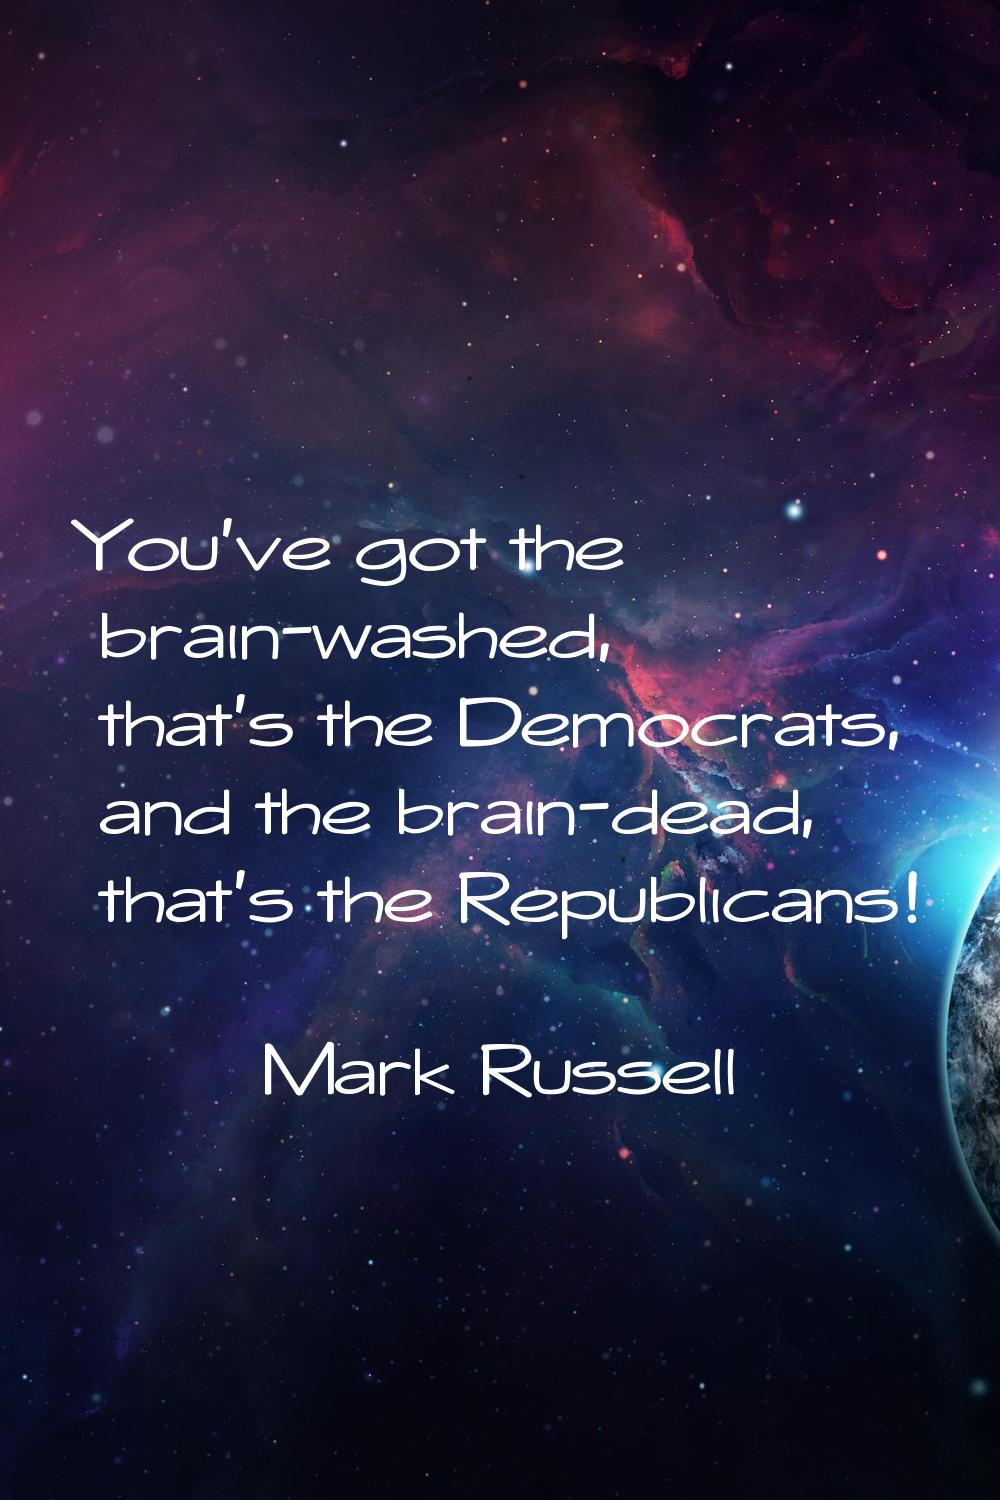 You've got the brain-washed, that's the Democrats, and the brain-dead, that's the Republicans!